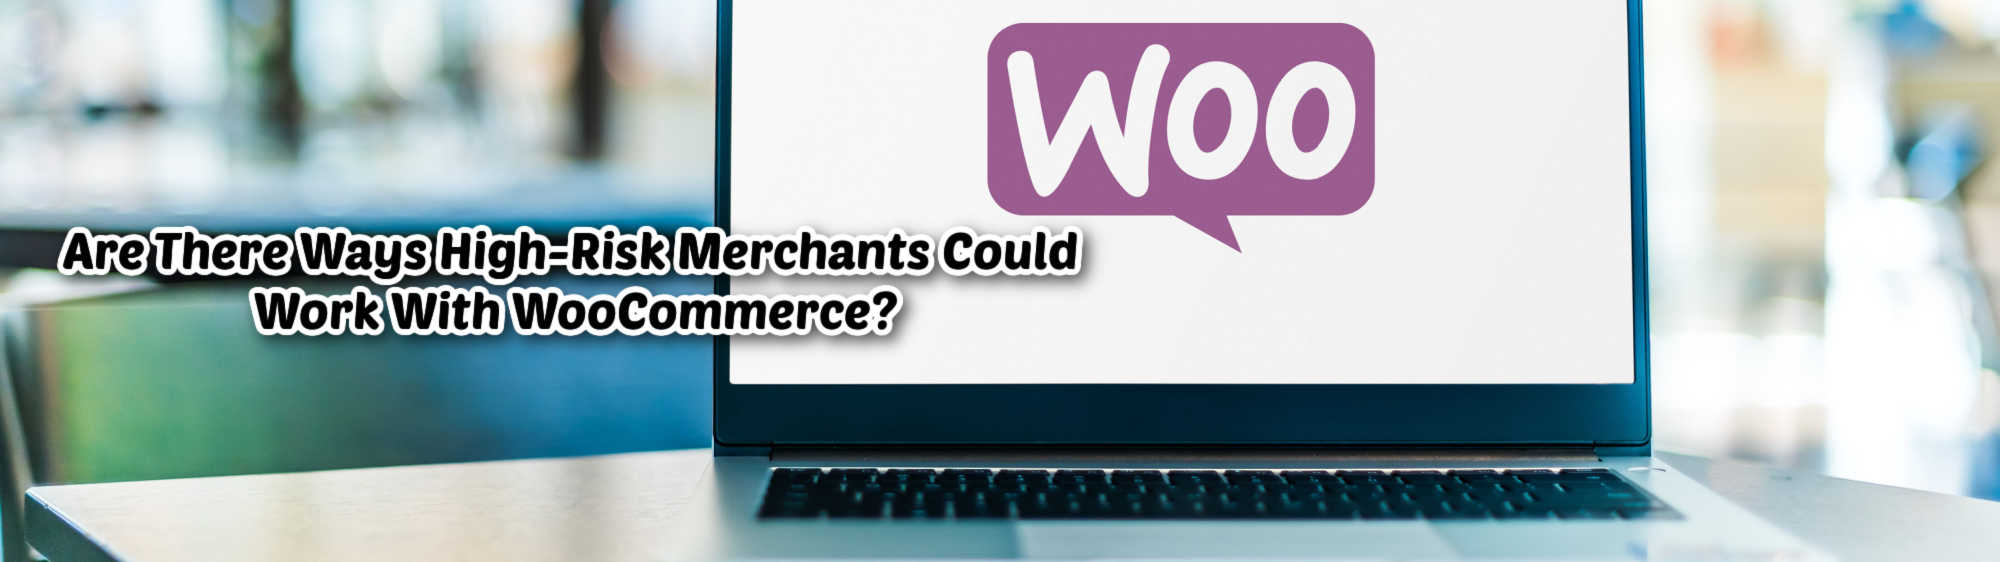 image of are there ways high risk merchants could work with woocommerce